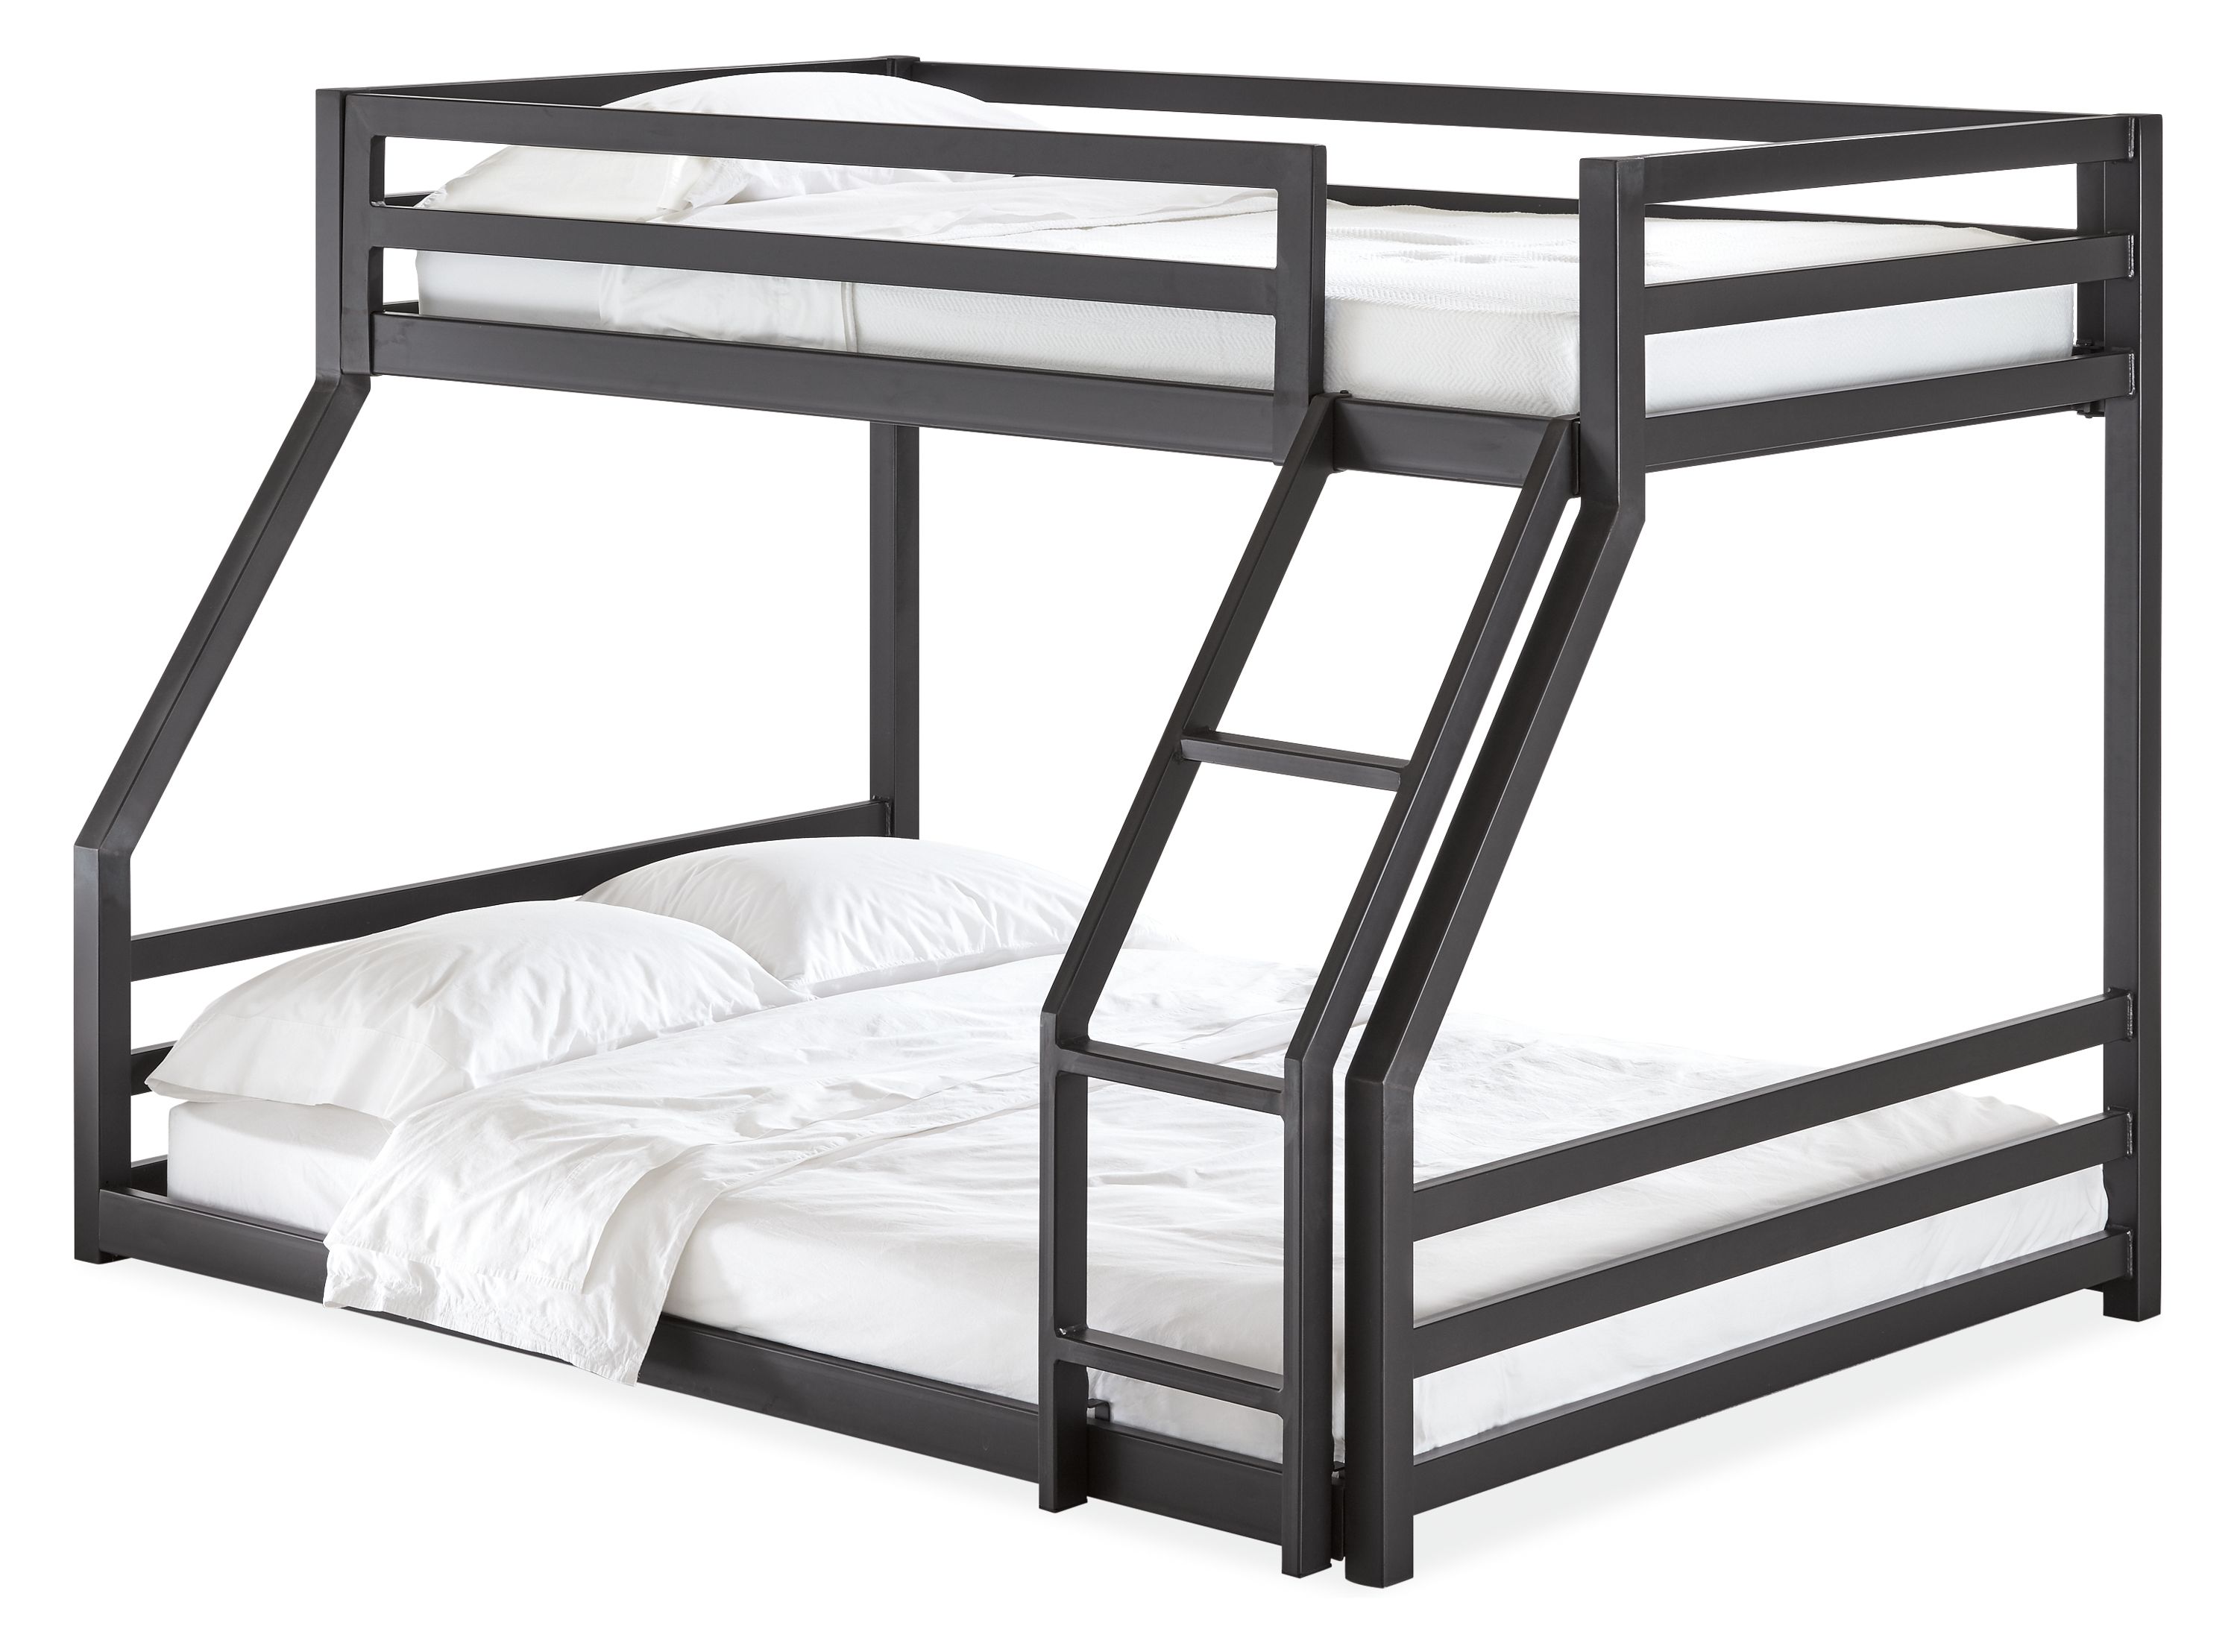 Fort Bunk Beds Modern Kids Furniture, Hideaway Bunk Bed Couch